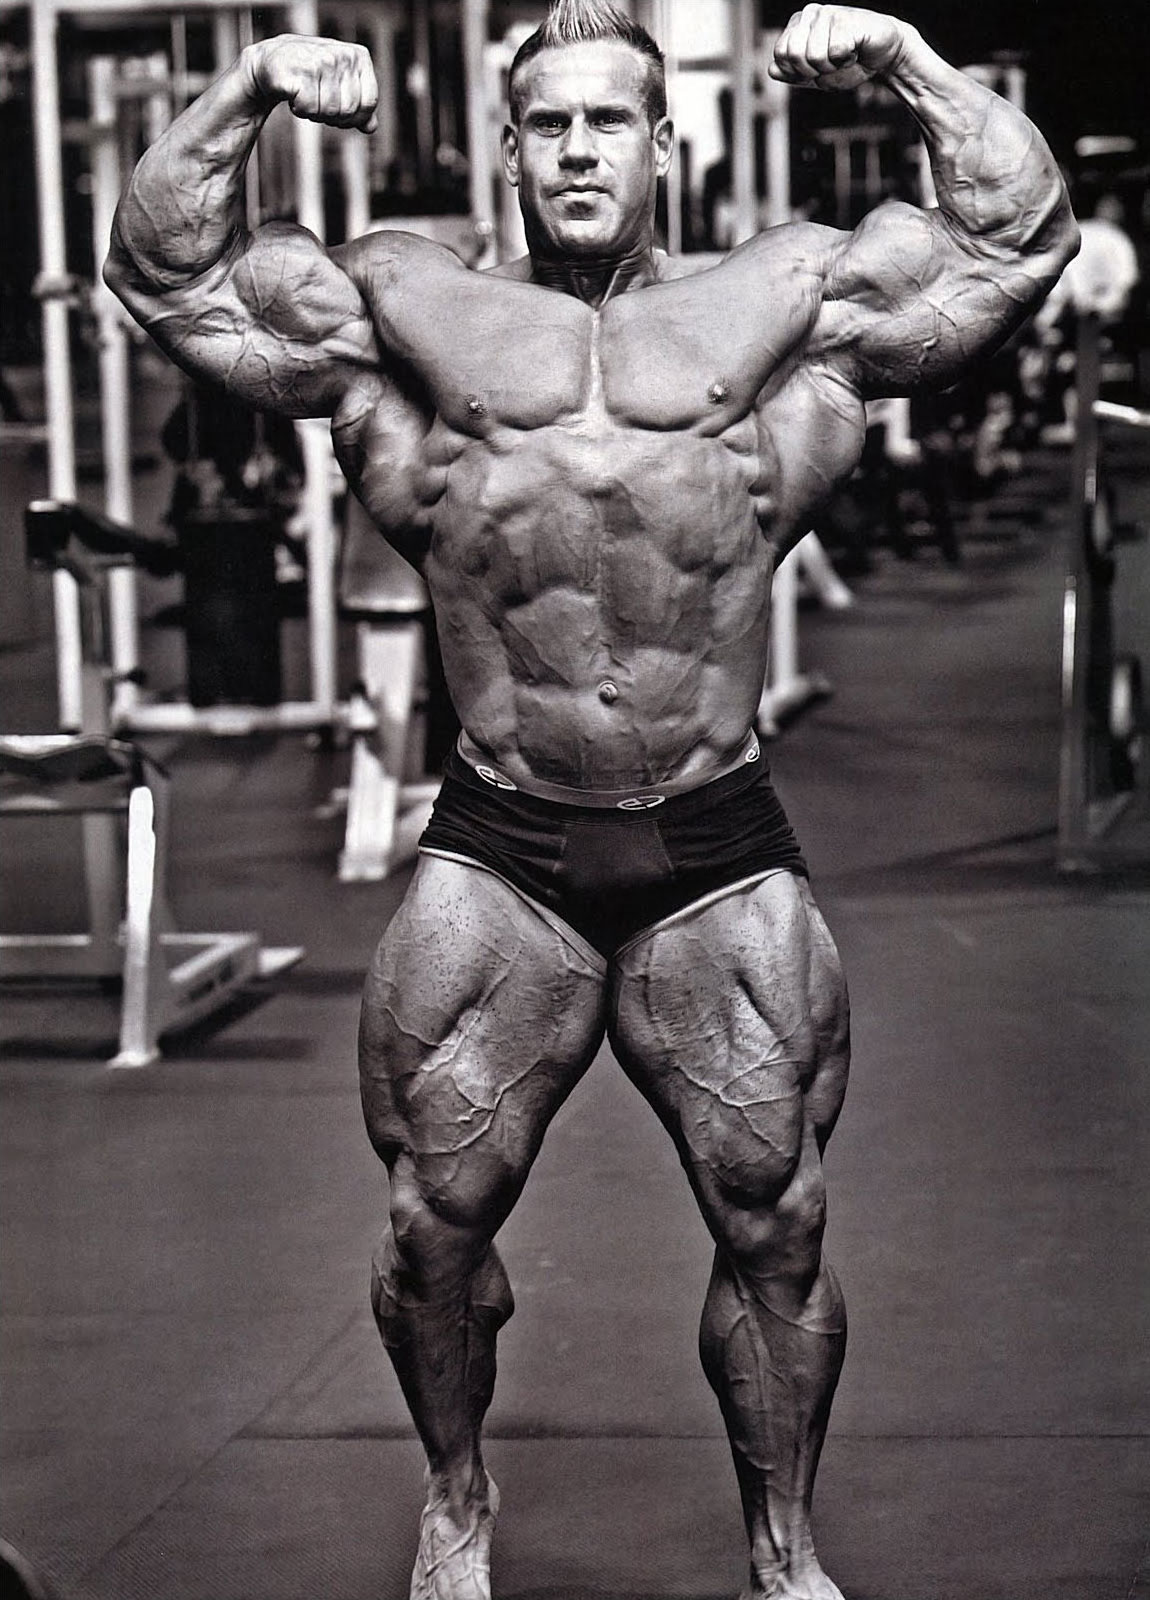 All you need to know about Jay Cutler in our Bodybuilder Hall of Fame